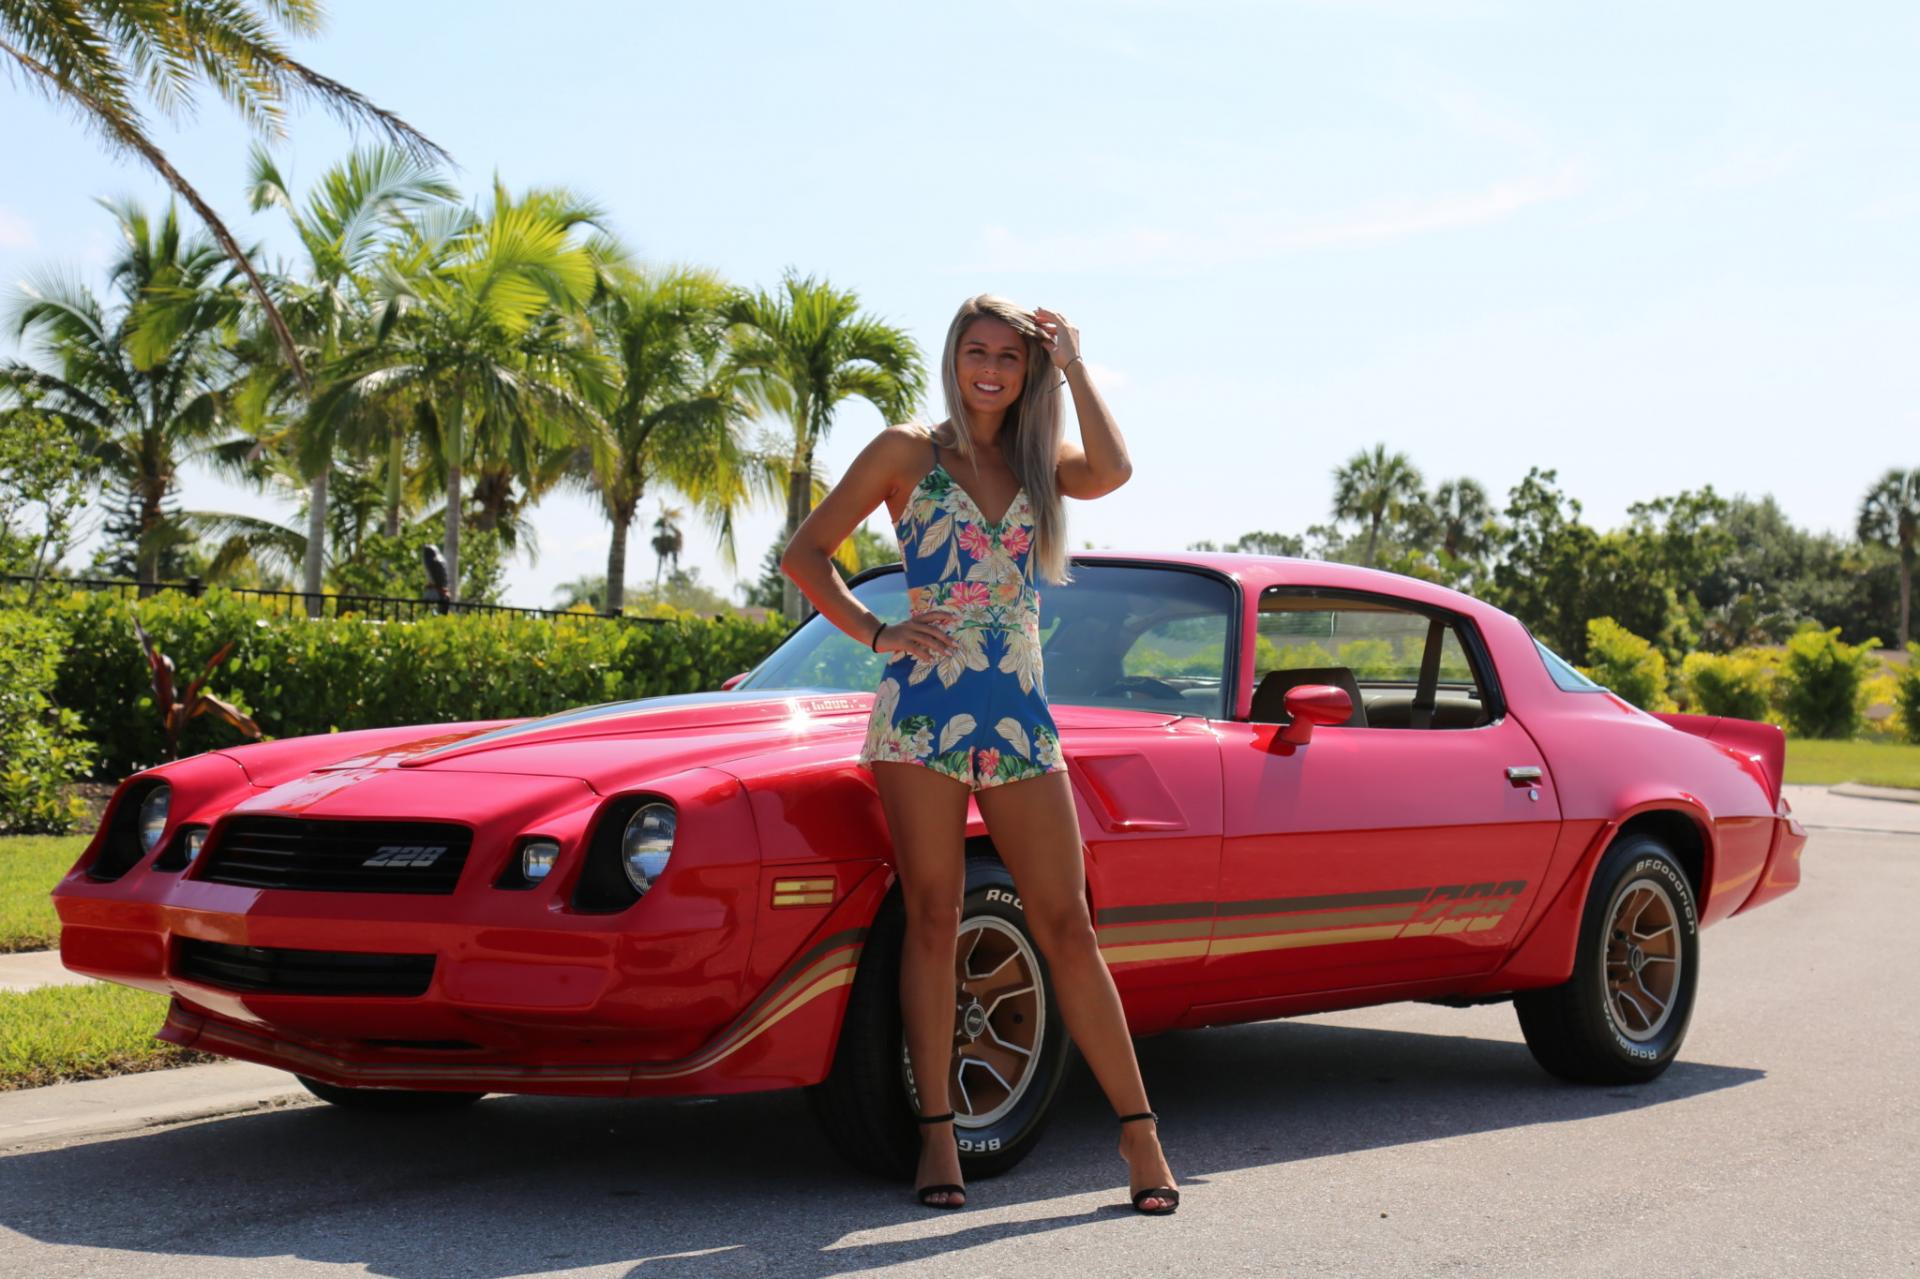 Used 1980 Chevrolet Camaro Z/28 for sale Sold at Muscle Cars for Sale Inc. in Fort Myers FL 33912 1